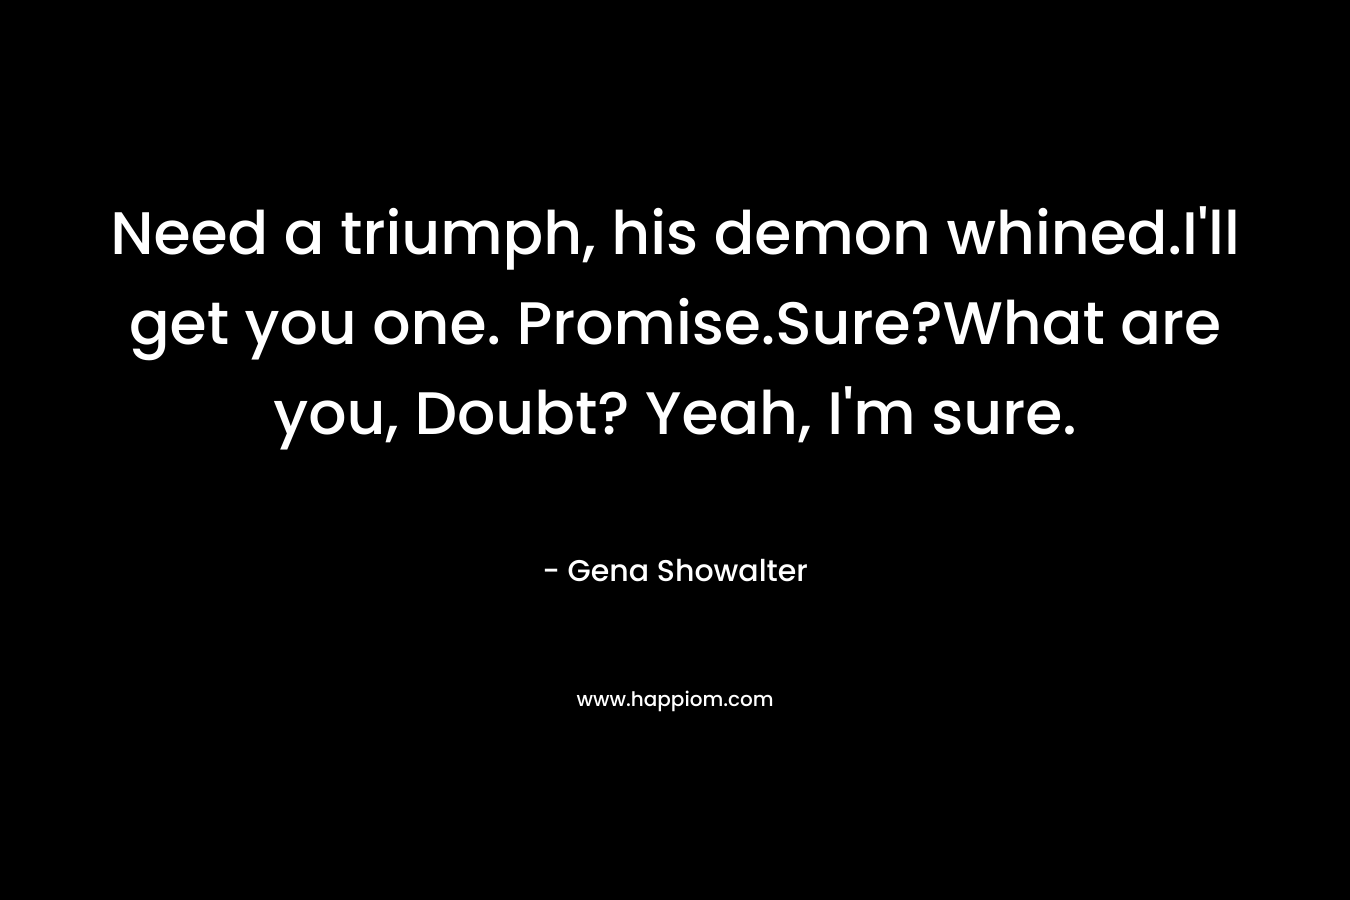 Need a triumph, his demon whined.I'll get you one. Promise.Sure?What are you, Doubt? Yeah, I'm sure.